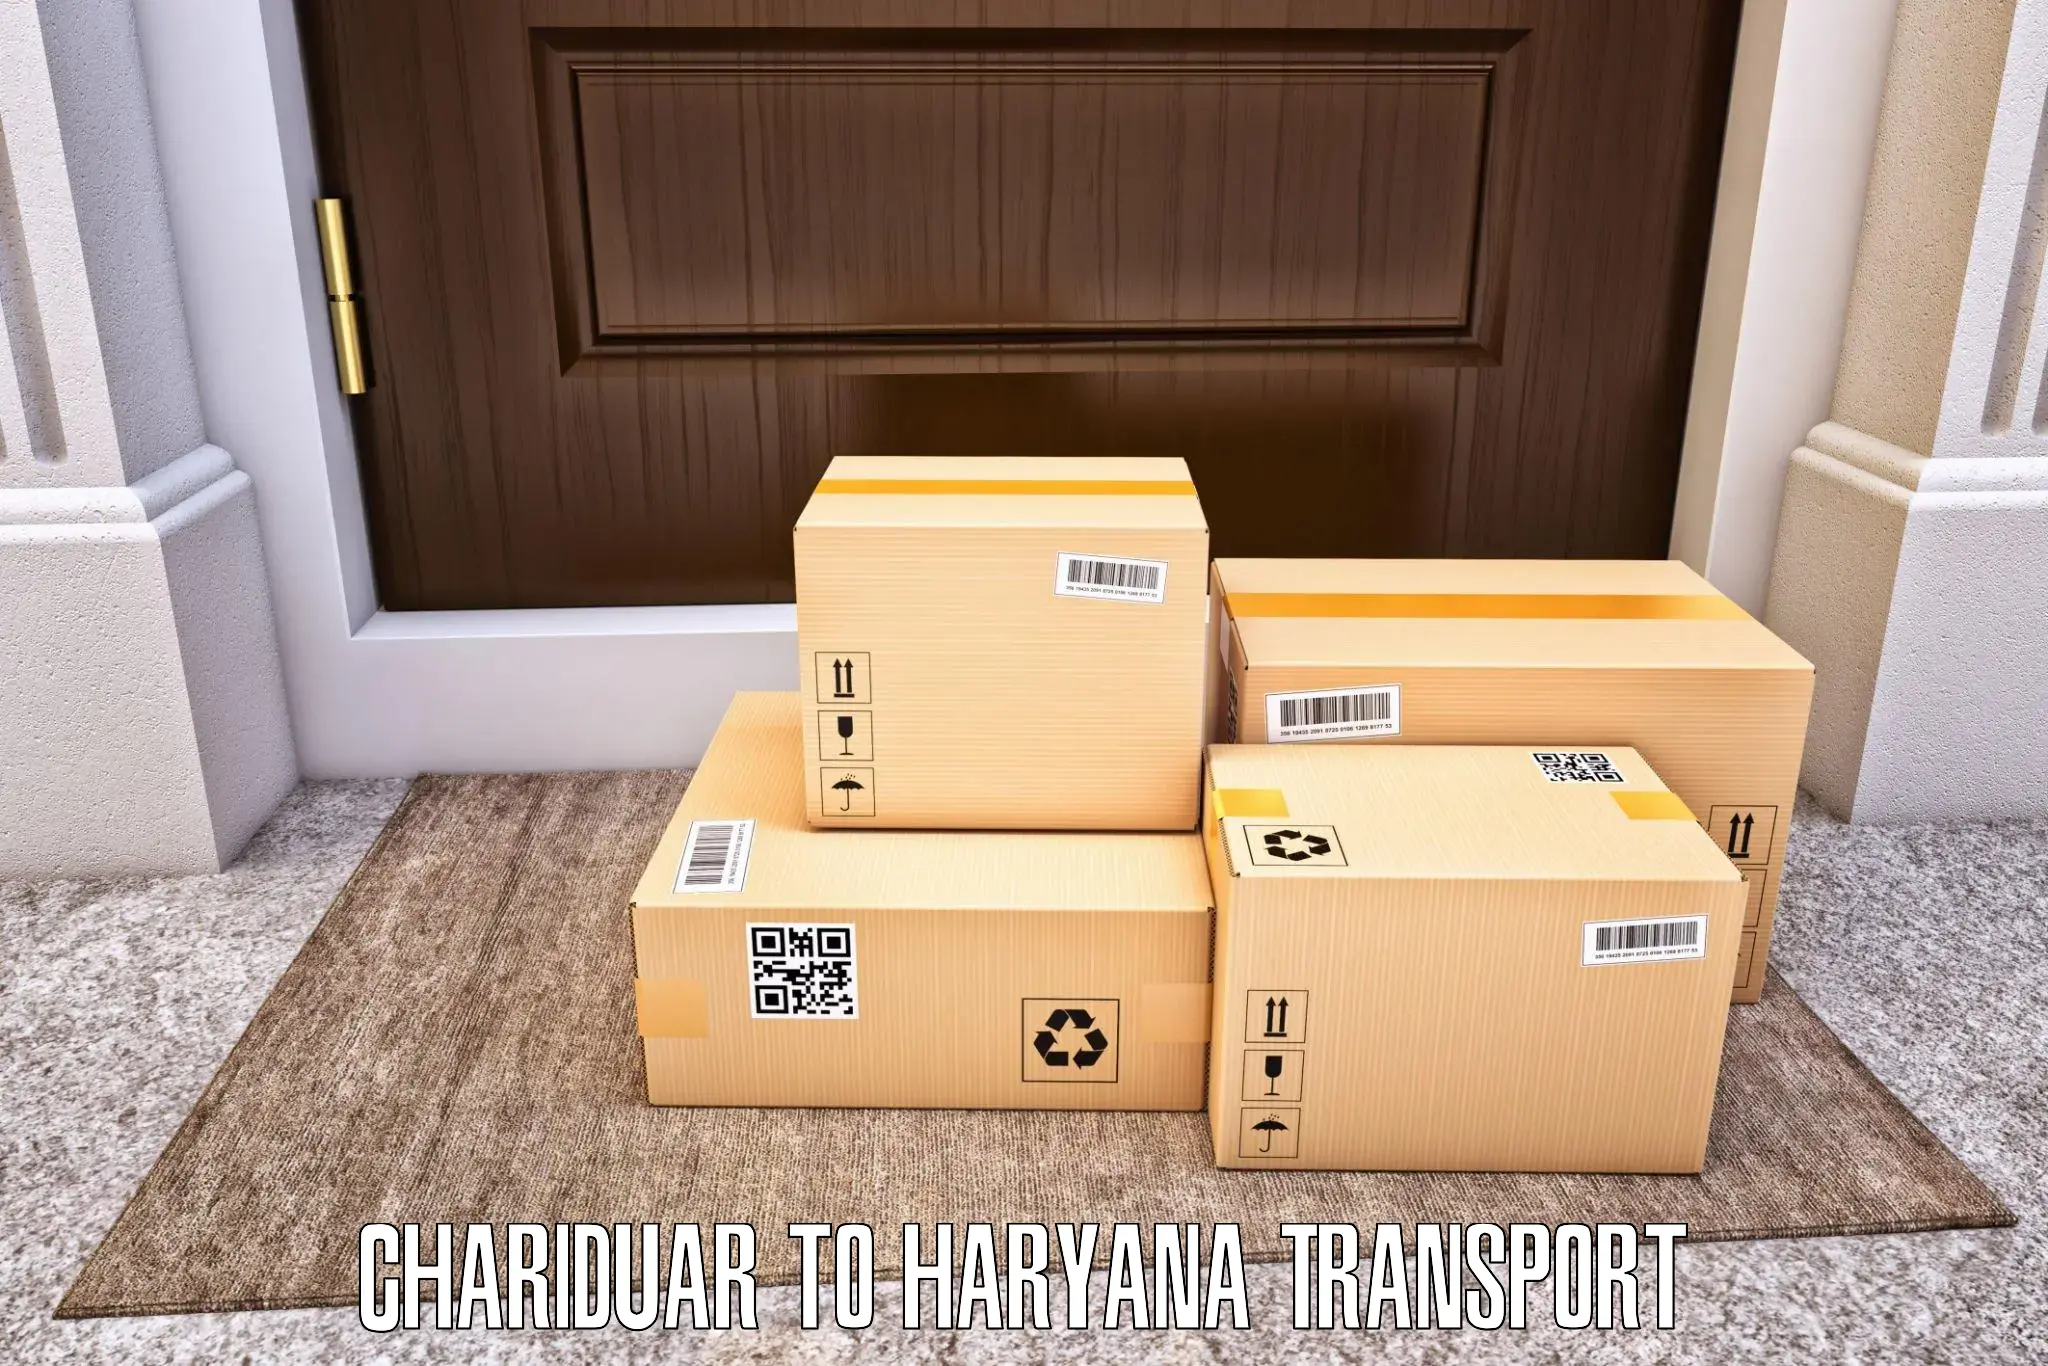 Container transportation services in Chariduar to Panipat